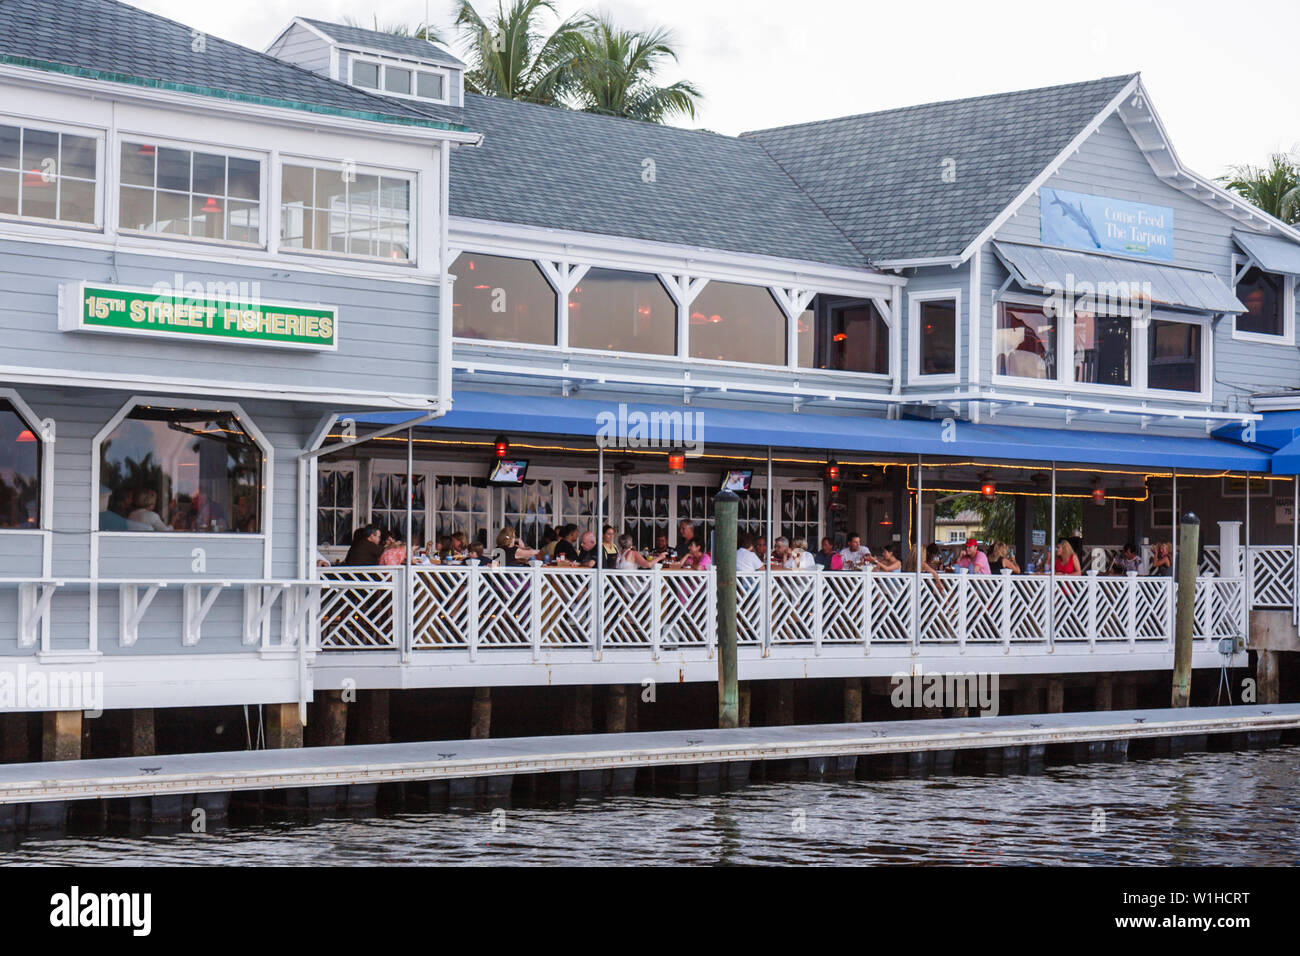 Fort Ft. Lauderdale Florida,15th Street Fisheries,restaurant restaurants food dining cafe cafes,service,cuisine,Intracoastal Stranahan River,seafood,w Stock Photo